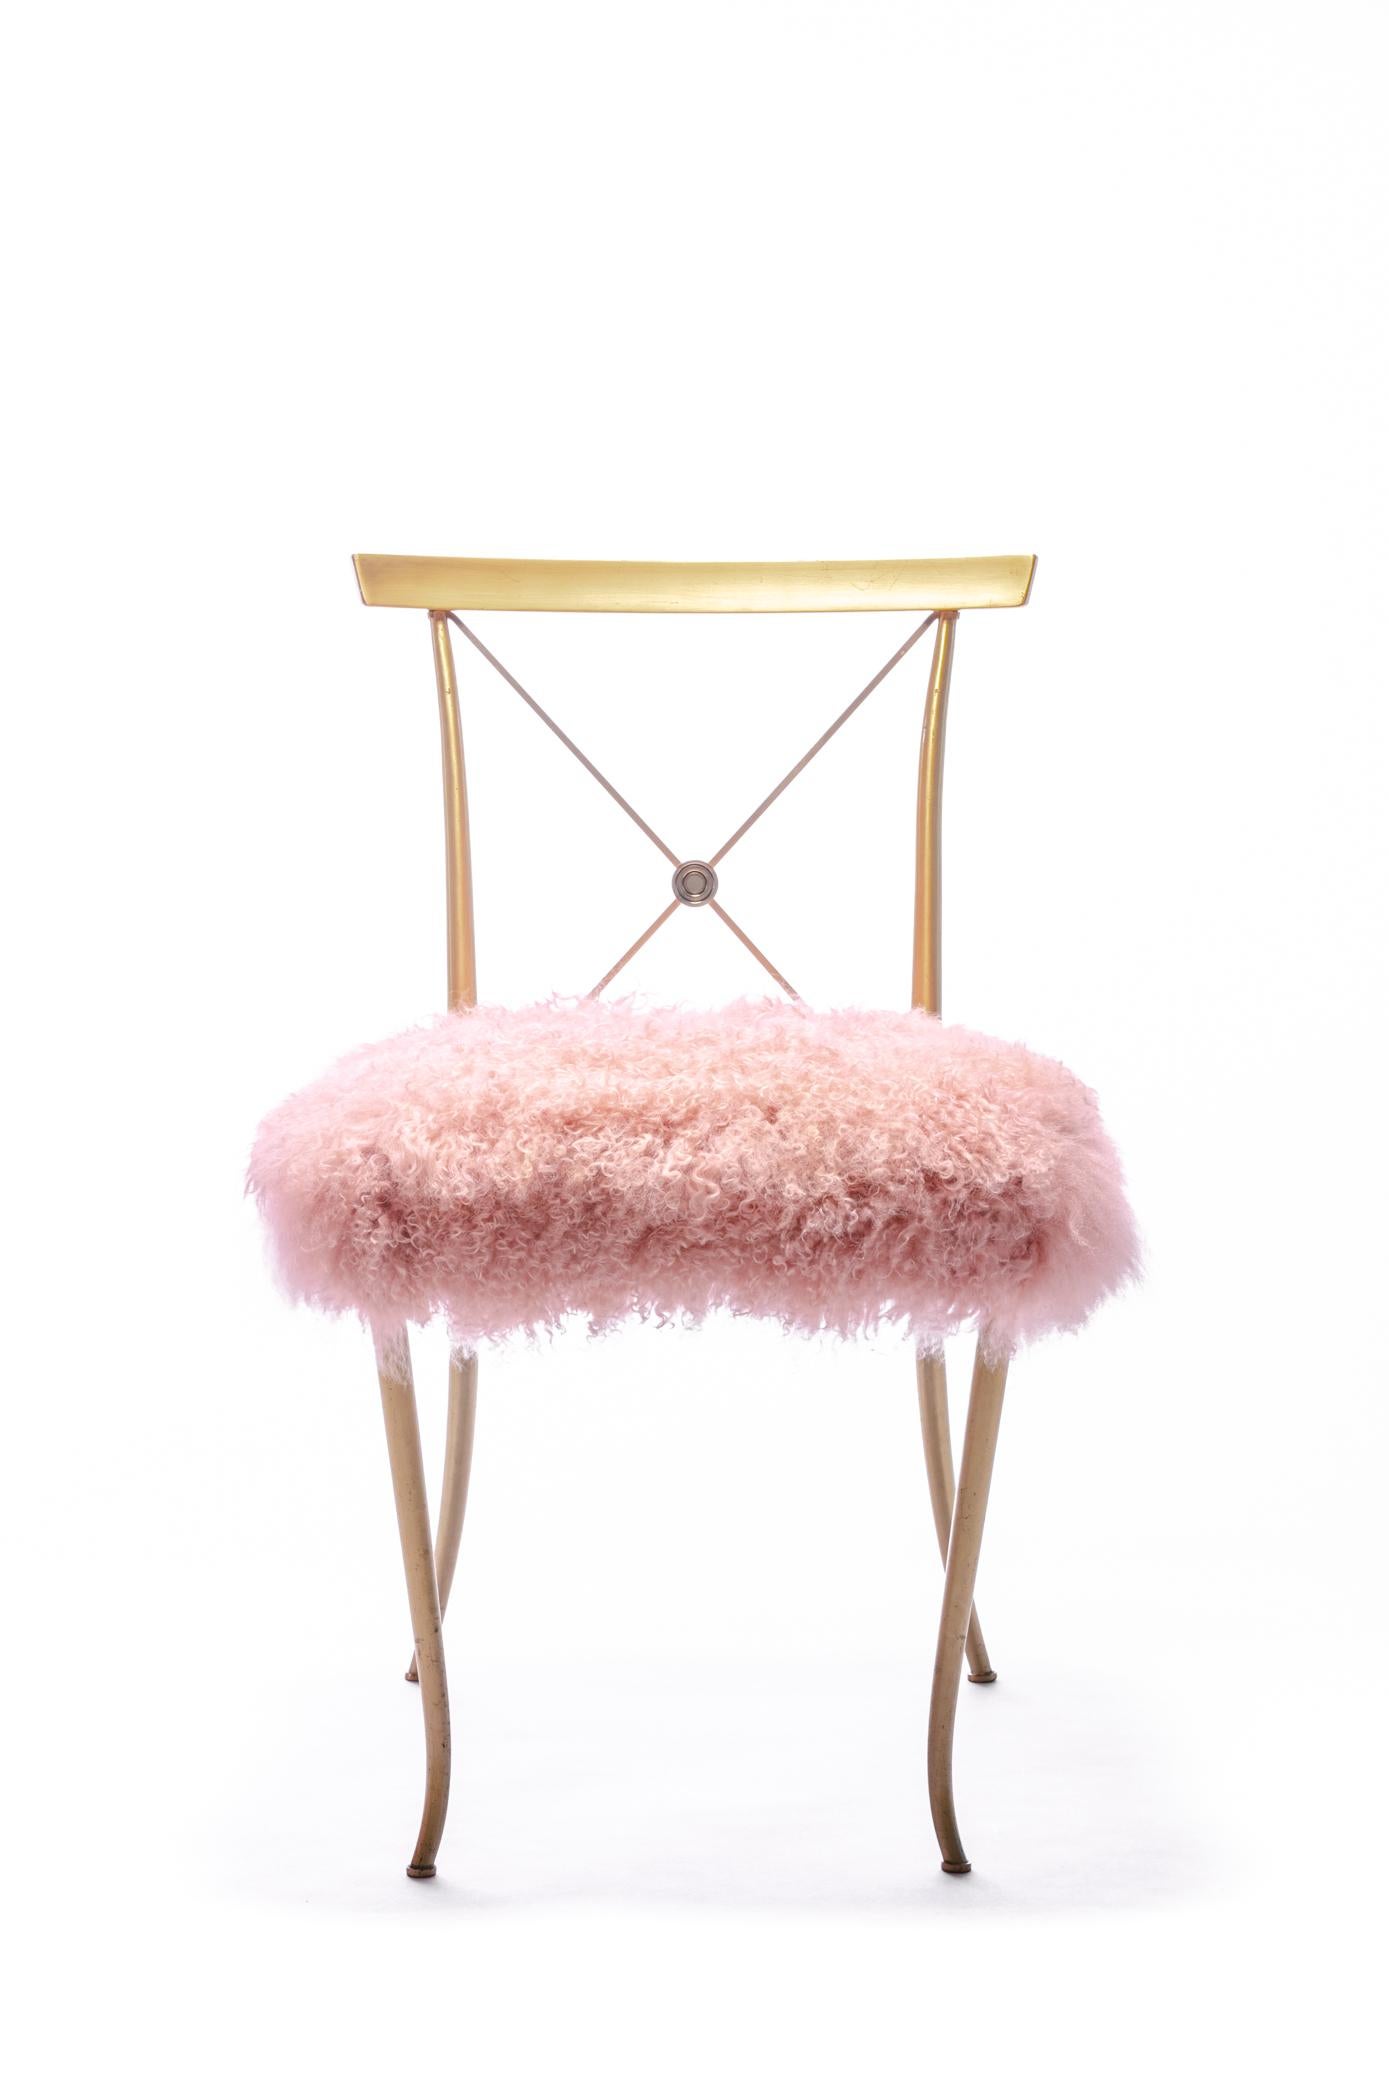 Mid-20th Century Billy Haines Brass Slipper Chair with Mongolian Sheepskin Fur Upholstery